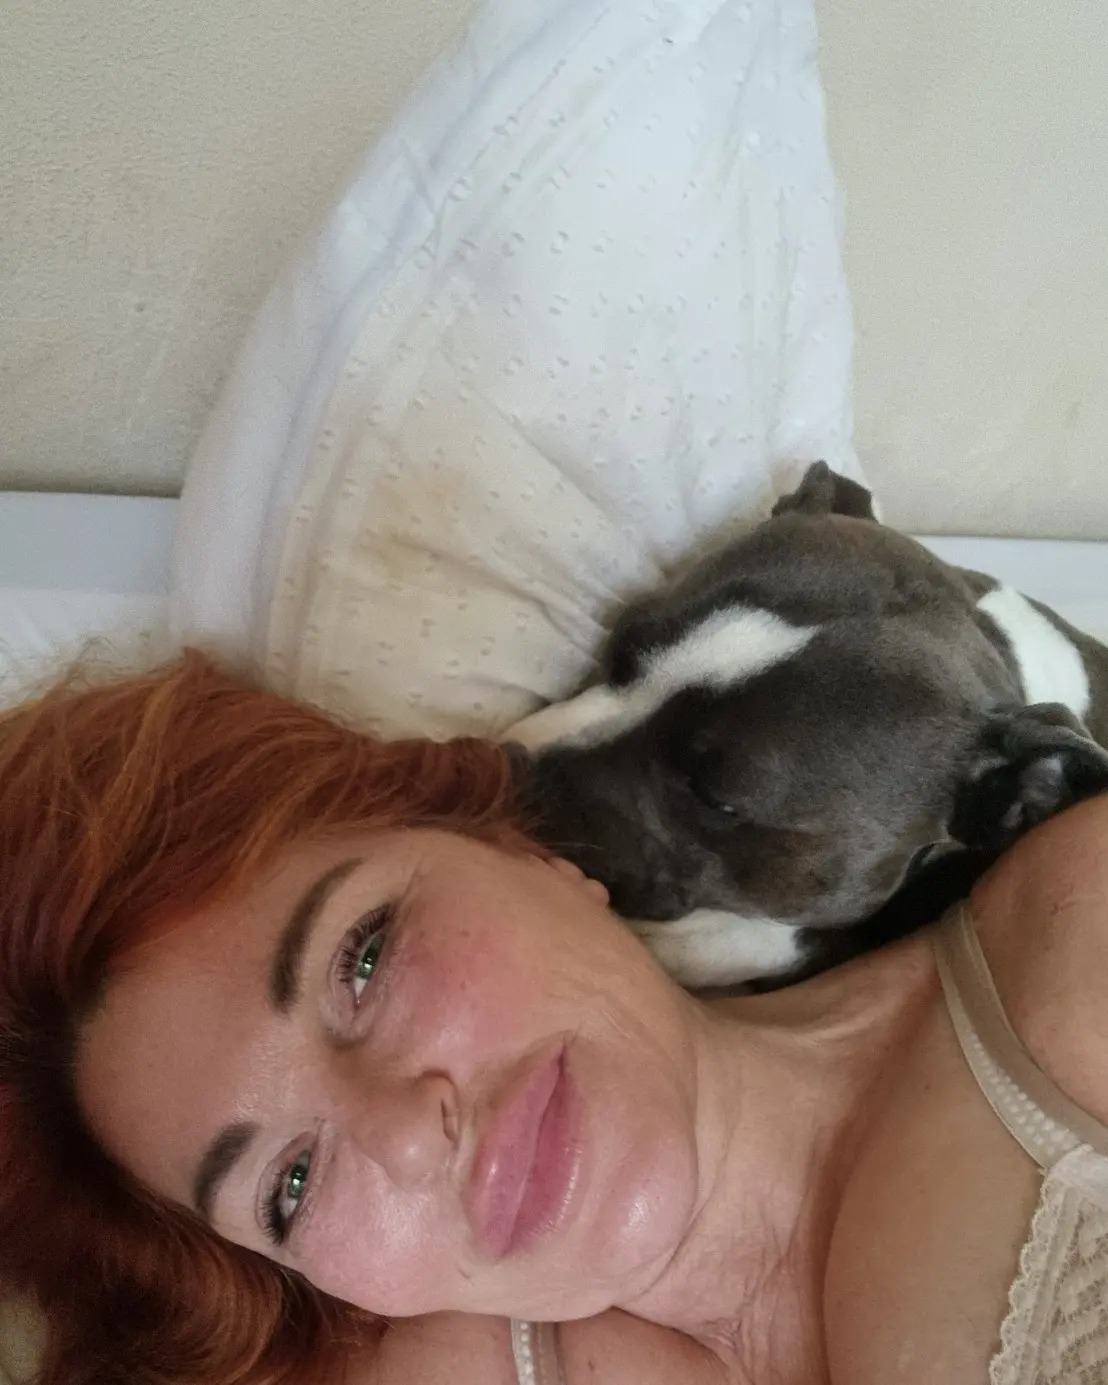 Good morning. 
Waking up with my best friend. 
Tuuli is the smallest big spoon I have ever known.
.
.
.
.
.
.
.
#redhead #redheads #ginger #gingers #gingersofinstagram #greeneyes #staffy #puppy #staffypuppy #englishstaffordshirebullterrier #englishstaffy #cutepuppy #USA #Maryland #california #newyorkcity #milfgang #Goddess #maturemodel